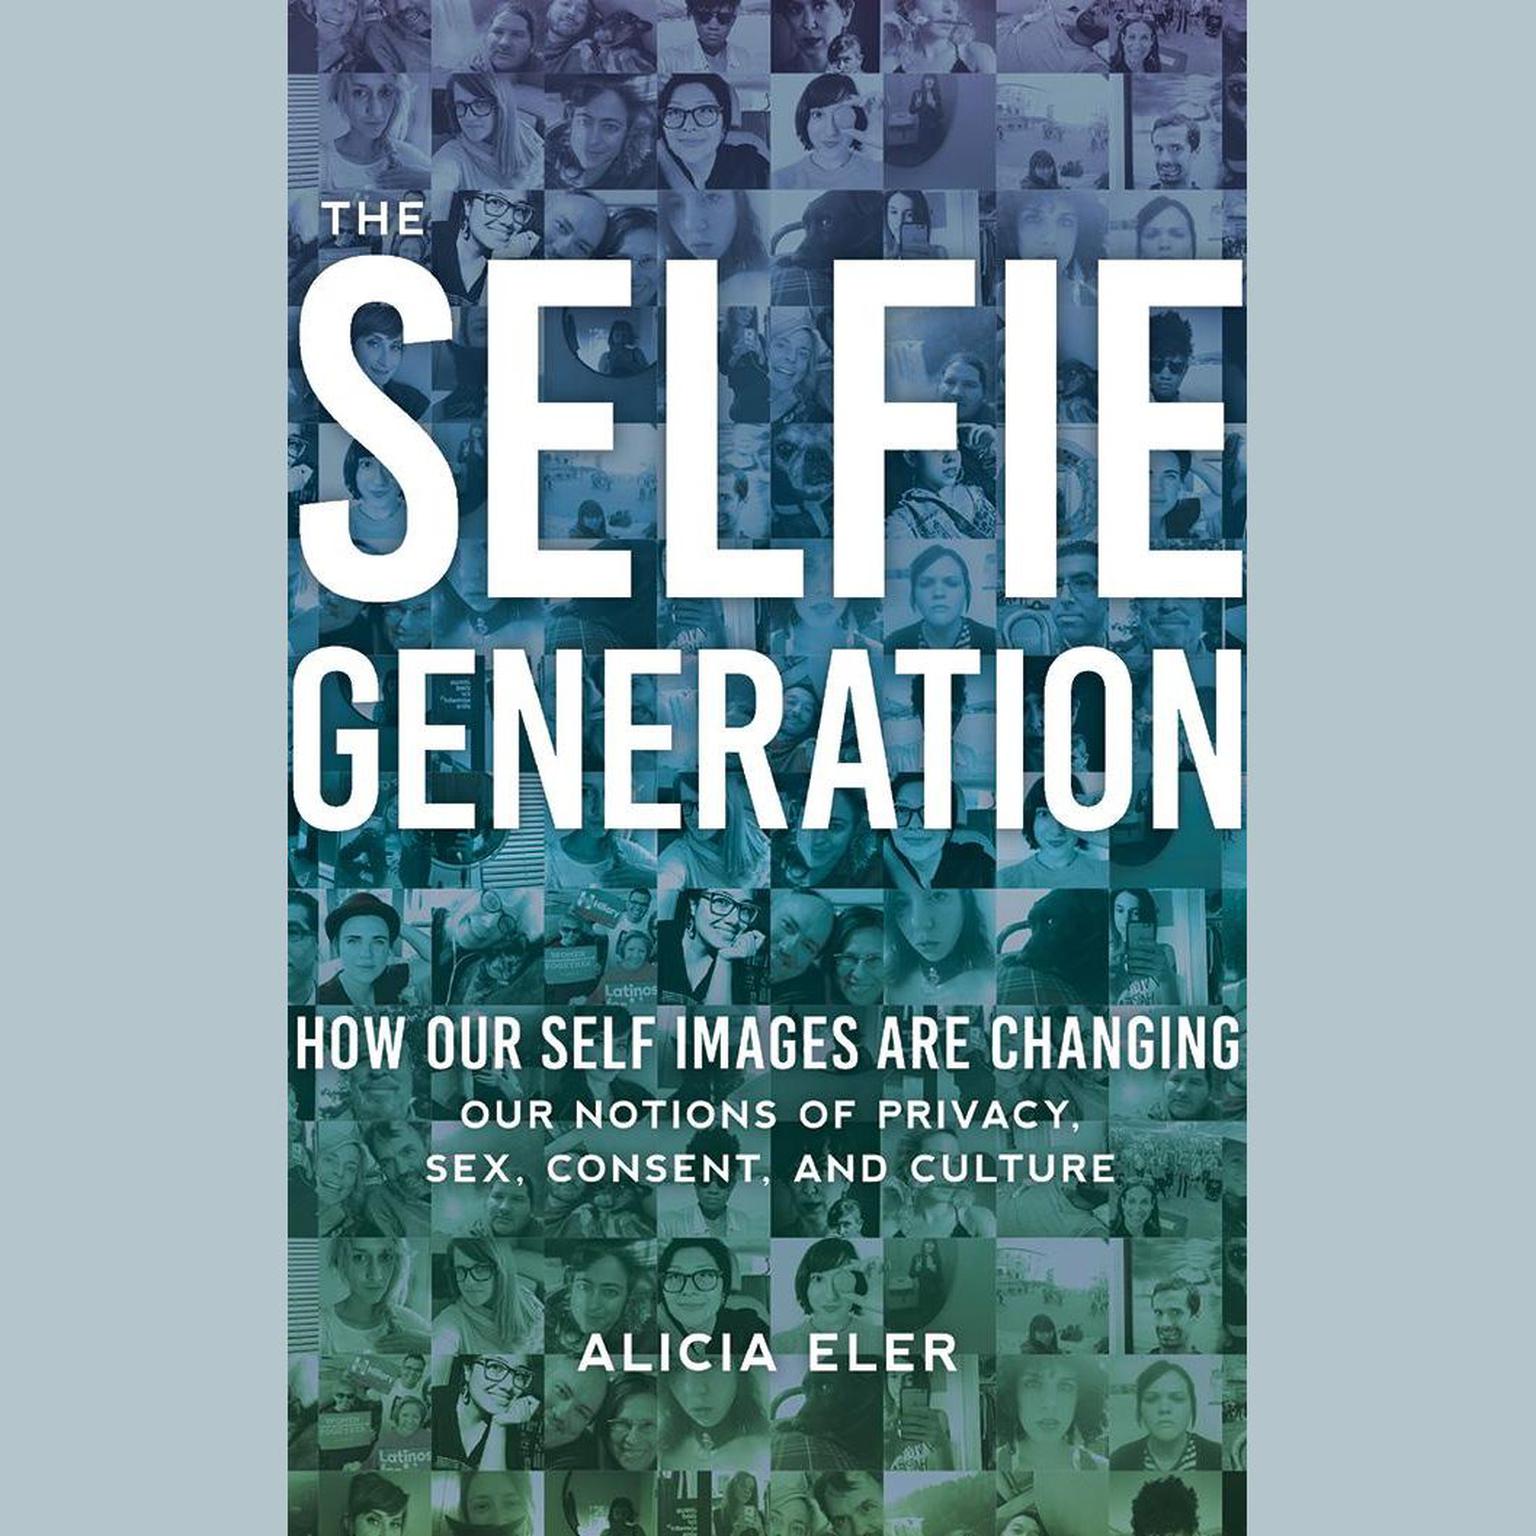 The Selfie Generation: How Our Self Images Are Changing Our Notions of Privacy, Sex, Consent, and Culture Audiobook, by Alicia Eler